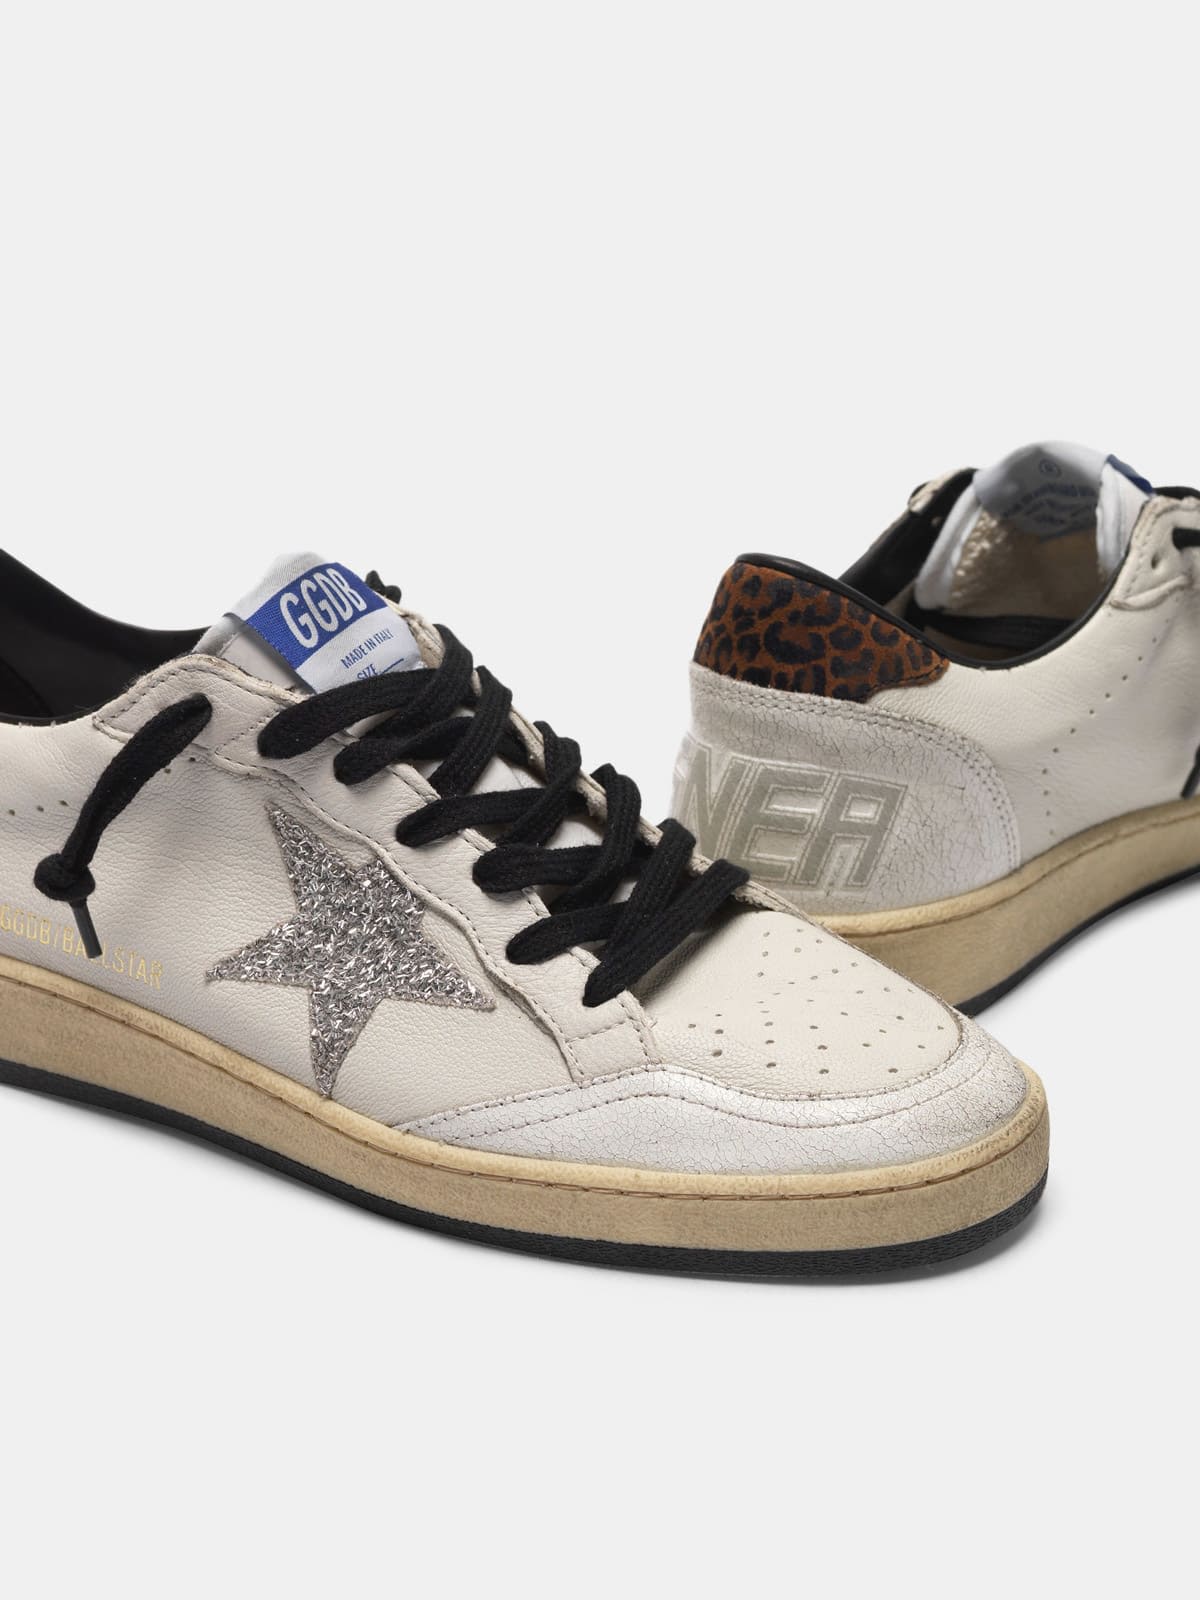 Ball Star sneakers with glittery star and leopard-print heel tab